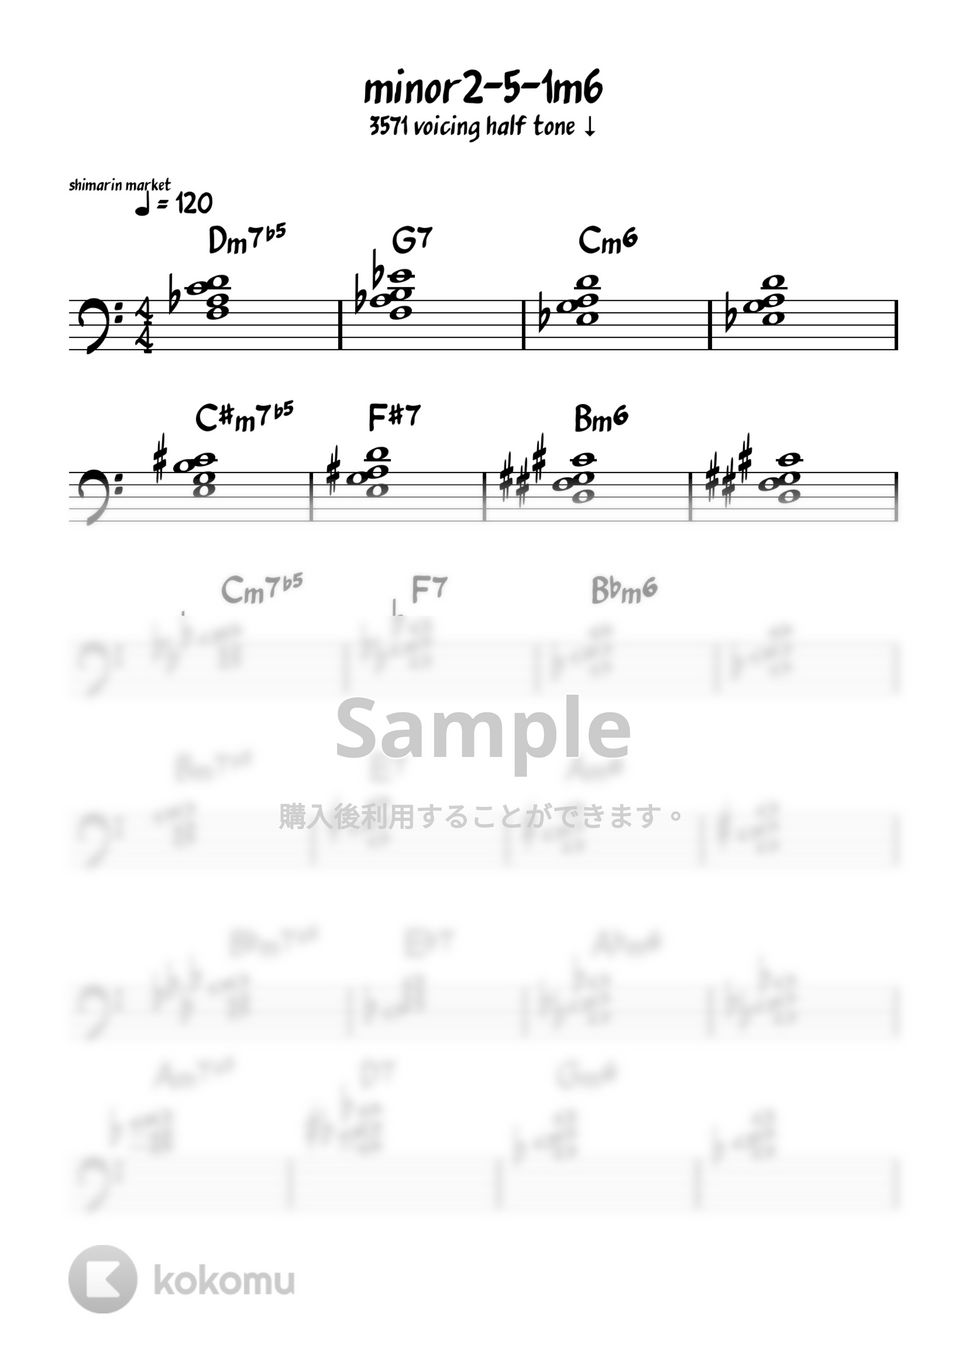 shimarinmarket - minor 2-5-1① 3571 half tone ↓exercise (for the left hand practice)